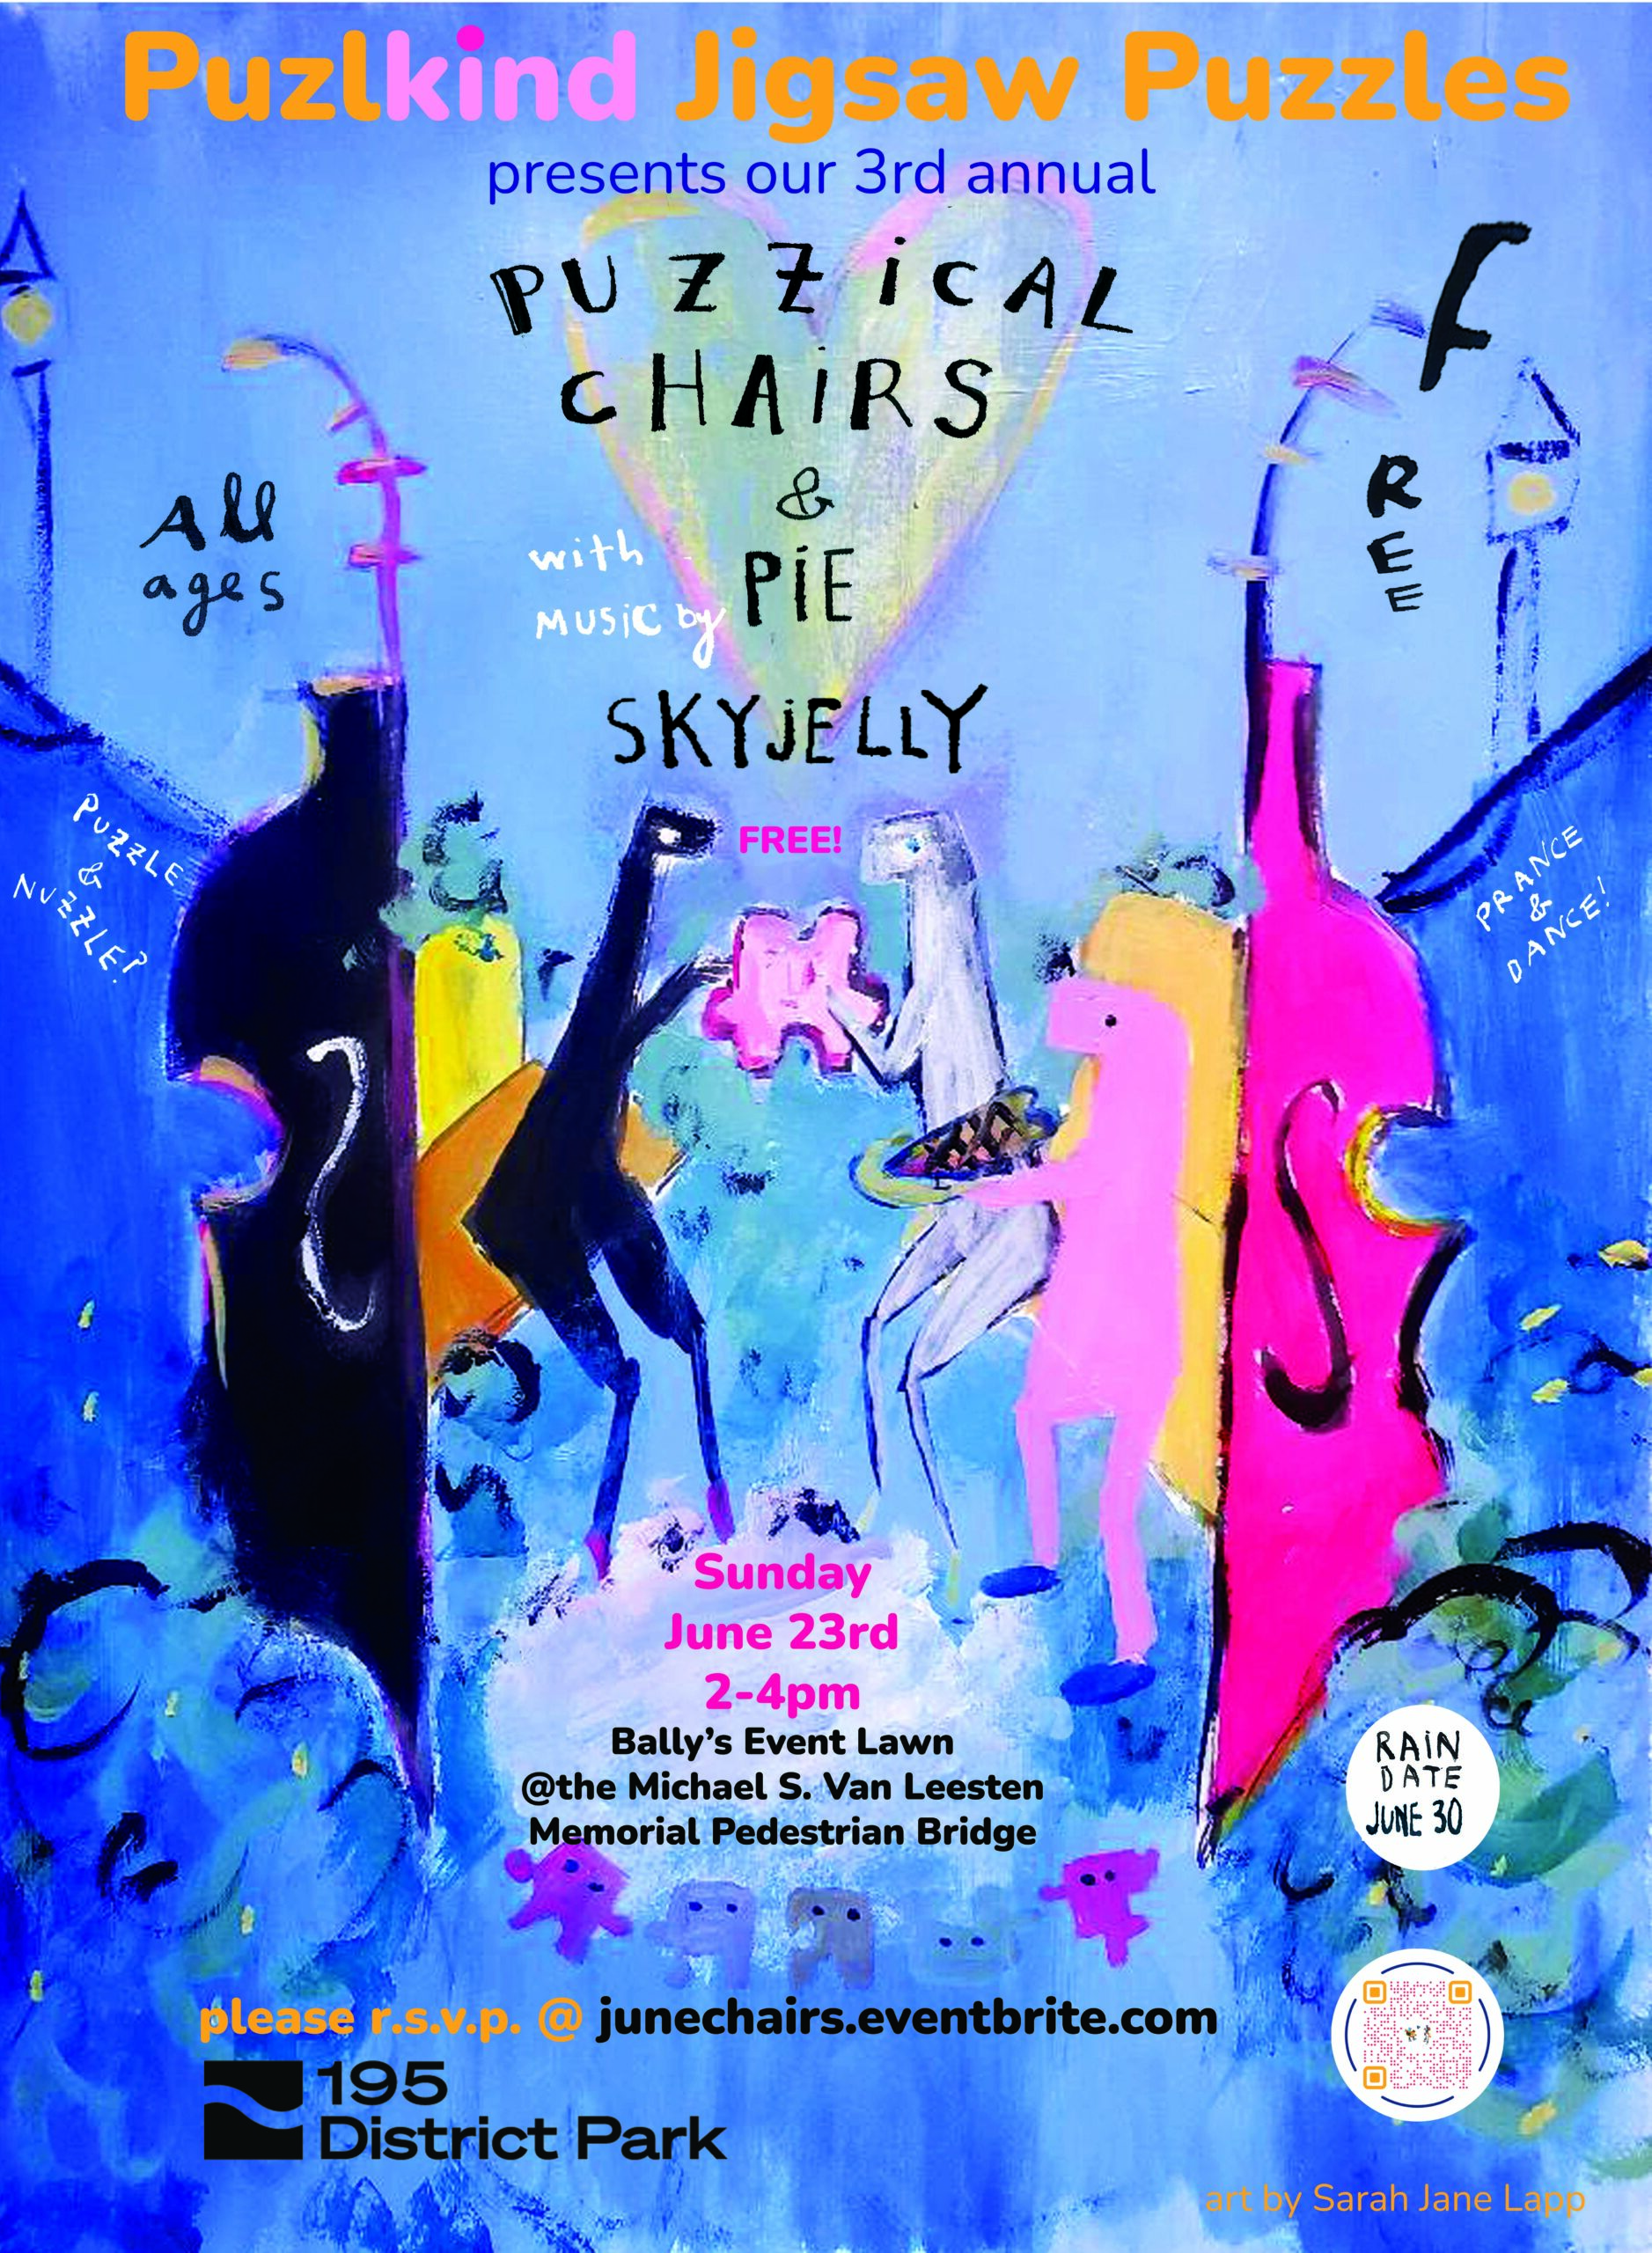 Flyer for 'Puzzical Chairs & Pie with Live Music by Skyjelly!'